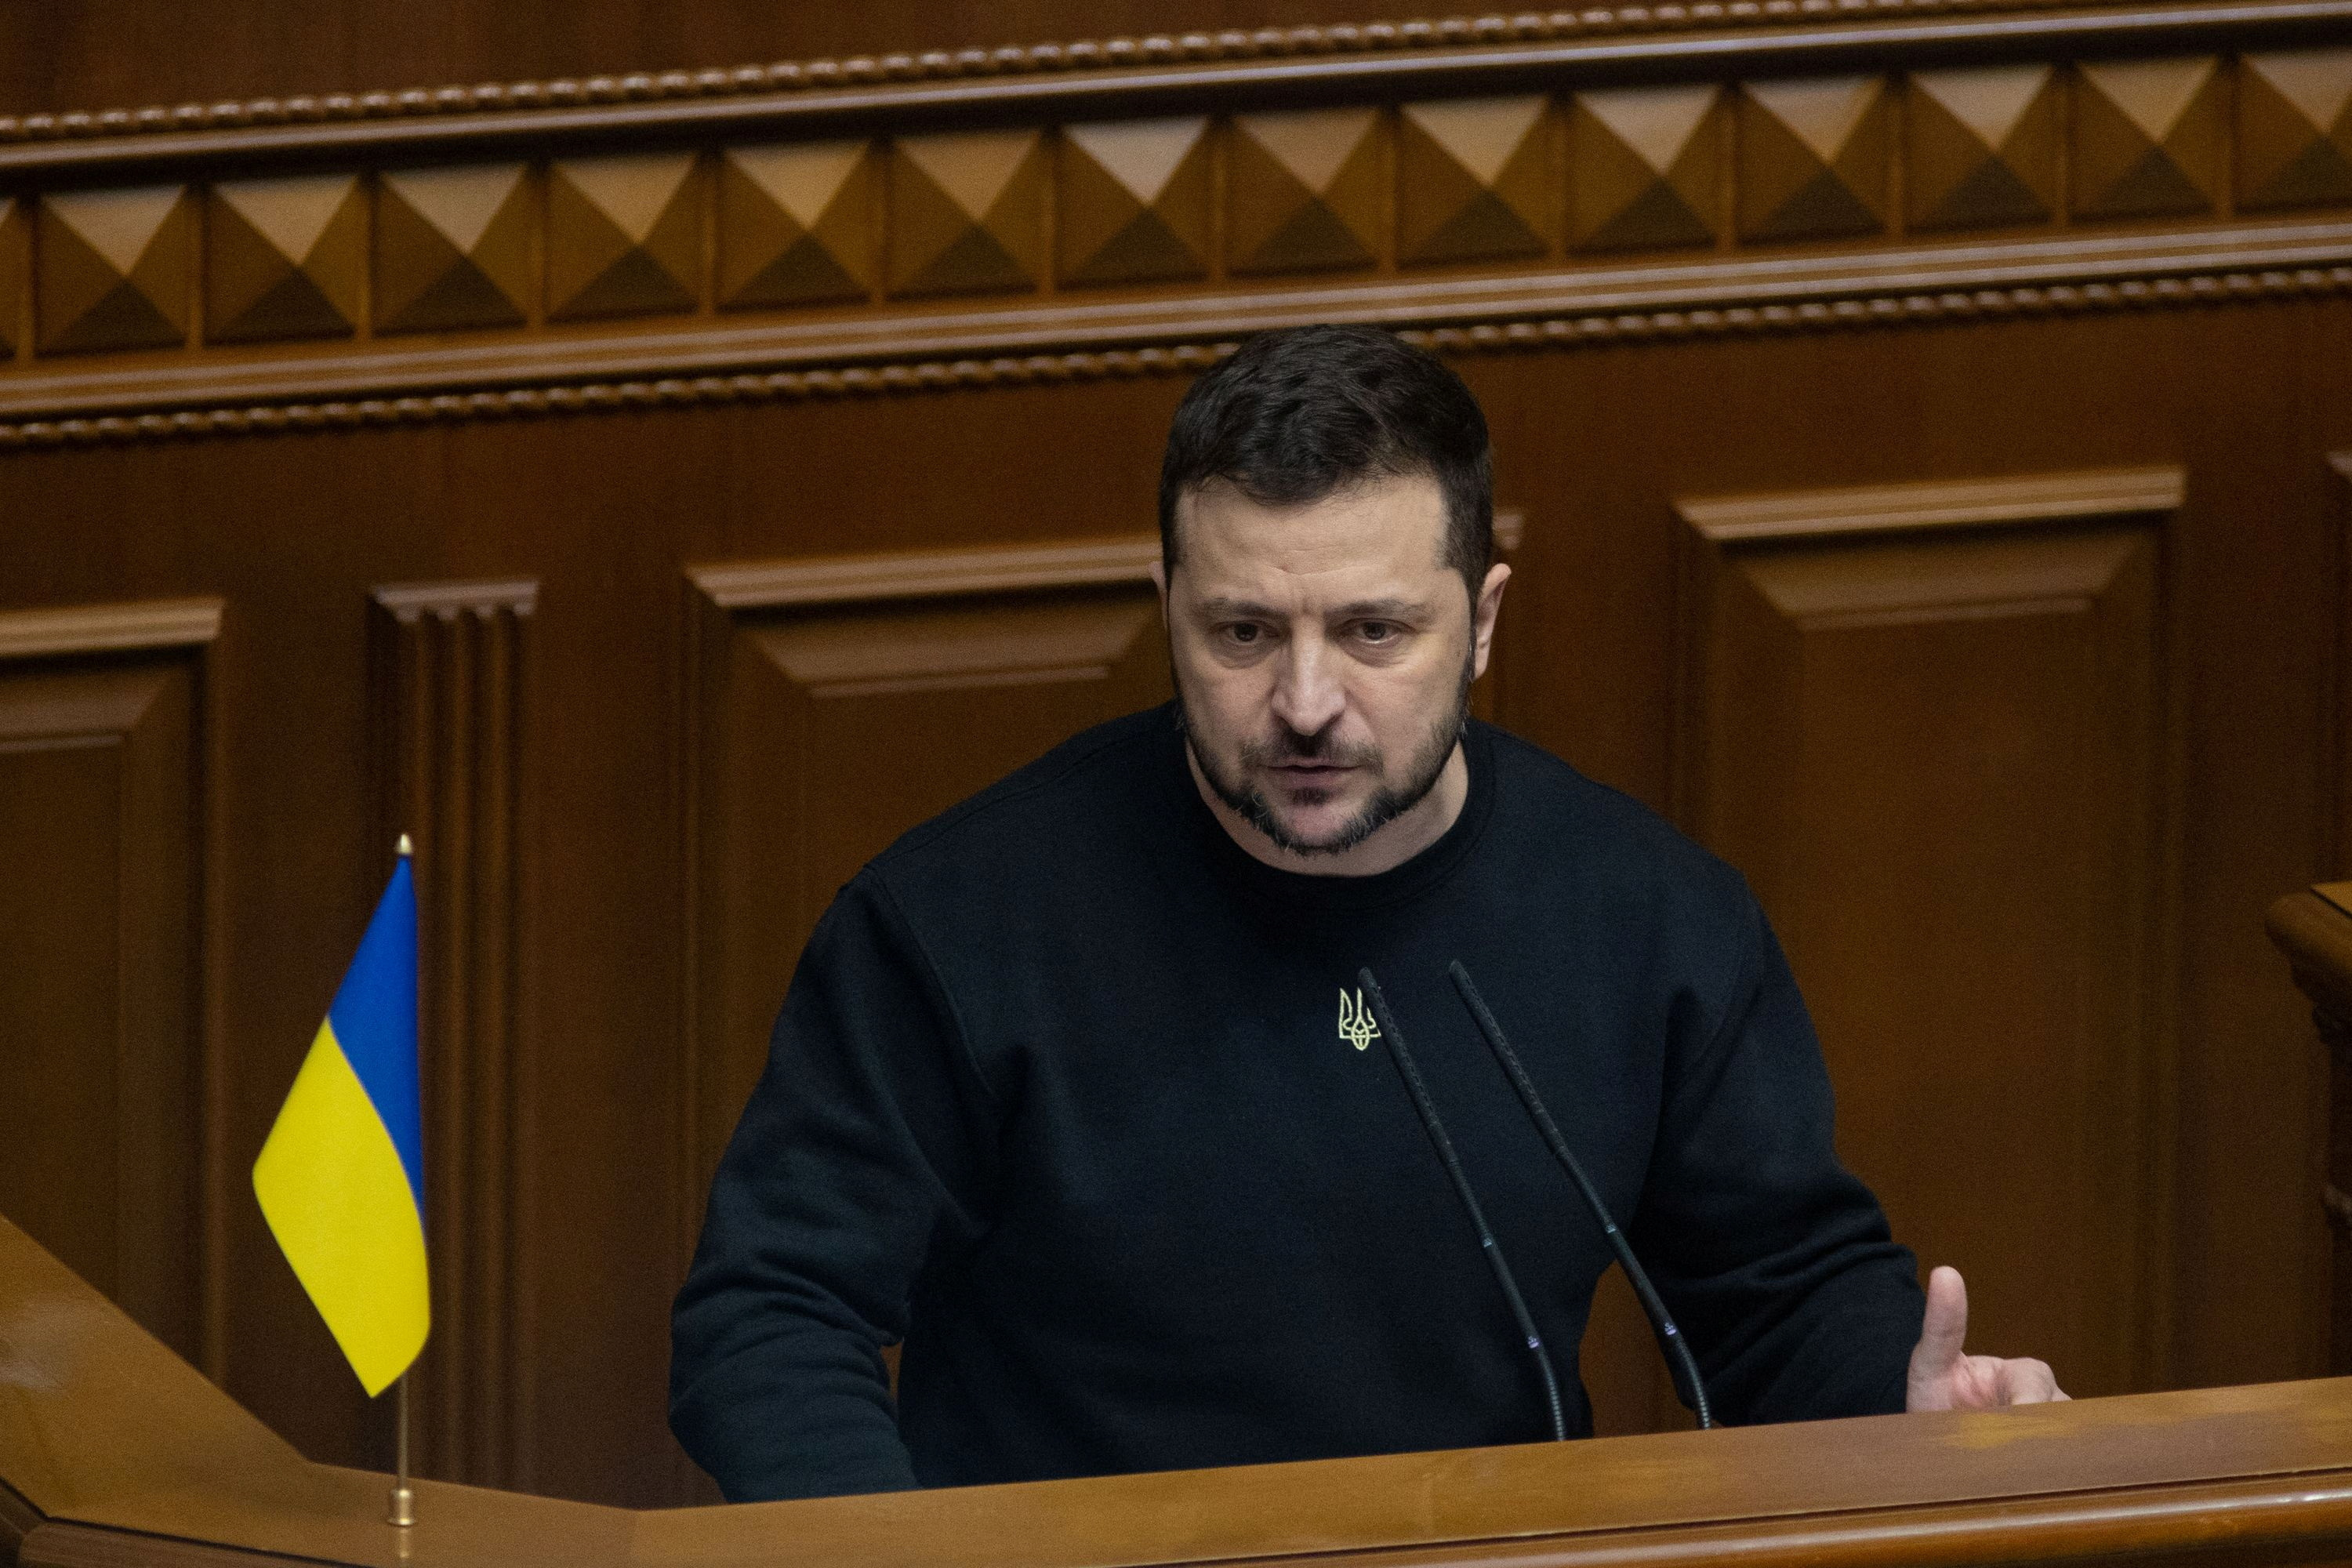 Ukraine's President Zelenskiy delivers his annual speech to lawmakers during a session of the Parliament in Kyiv